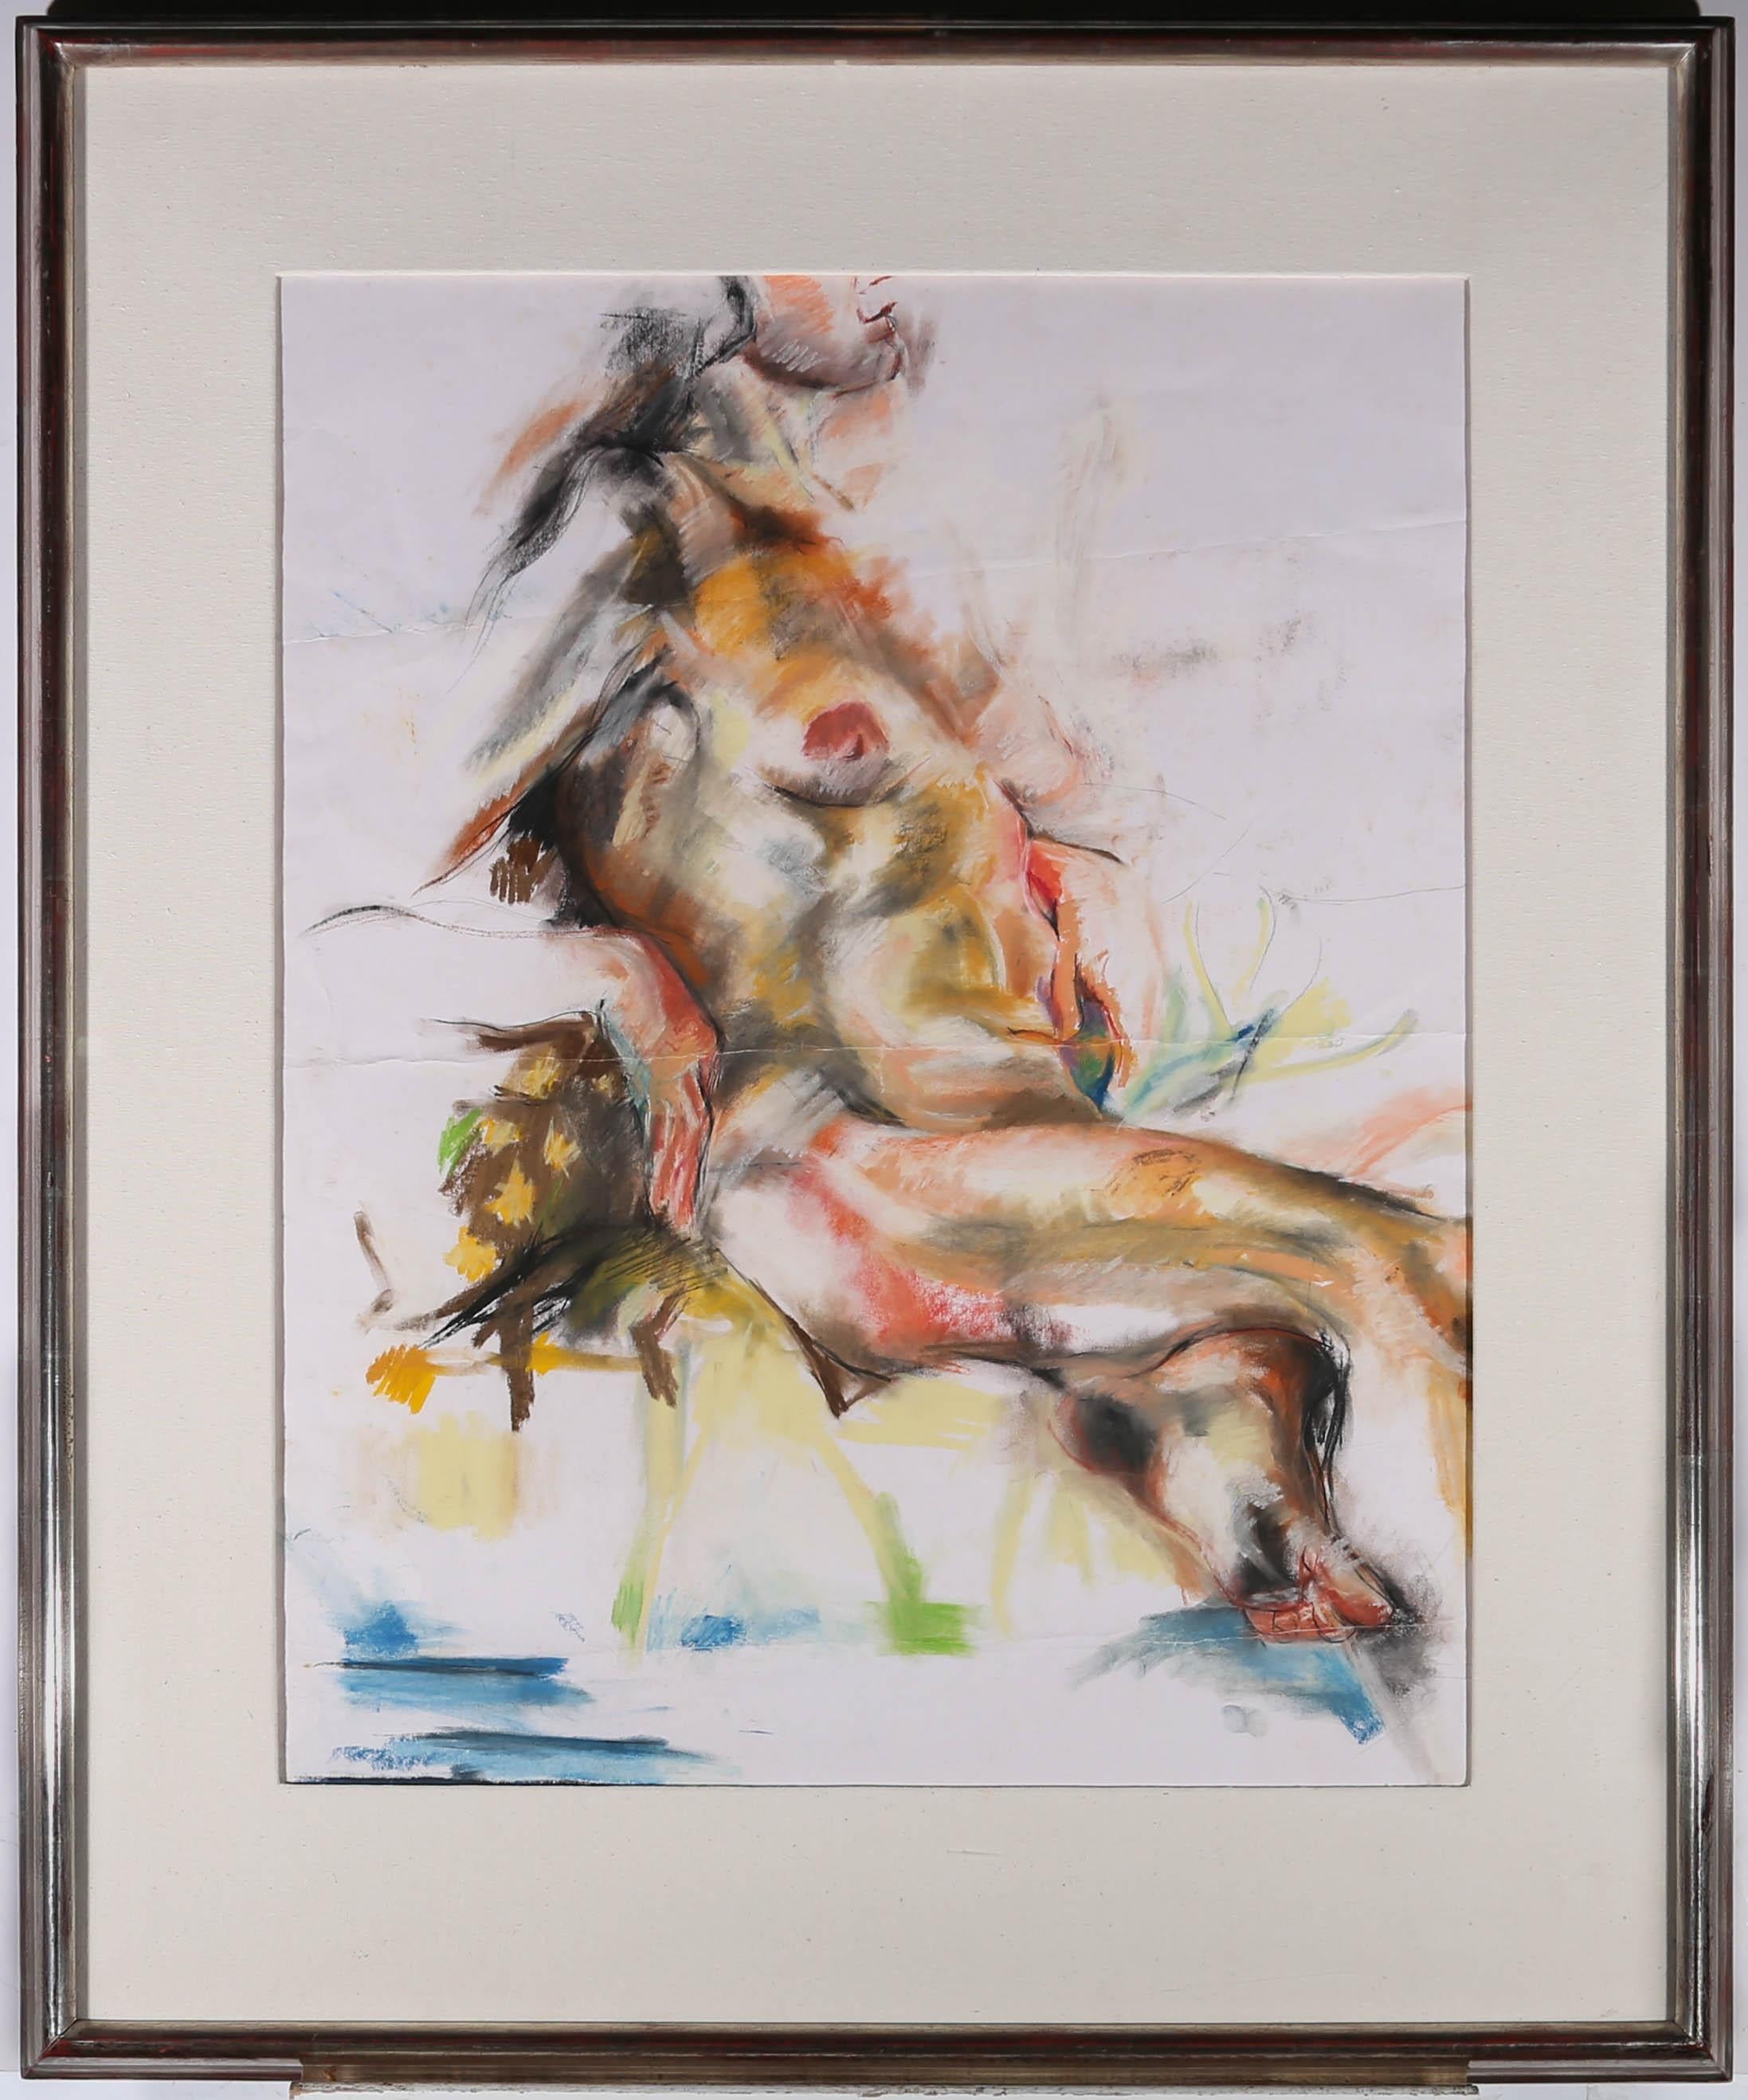 A large and colourful nude study in pastel and graphite, presented in a substantial contemporary silver gilt frame with wide linen mount. There is a label at the reverse with the artist's name and information indicating that this artwork was part of